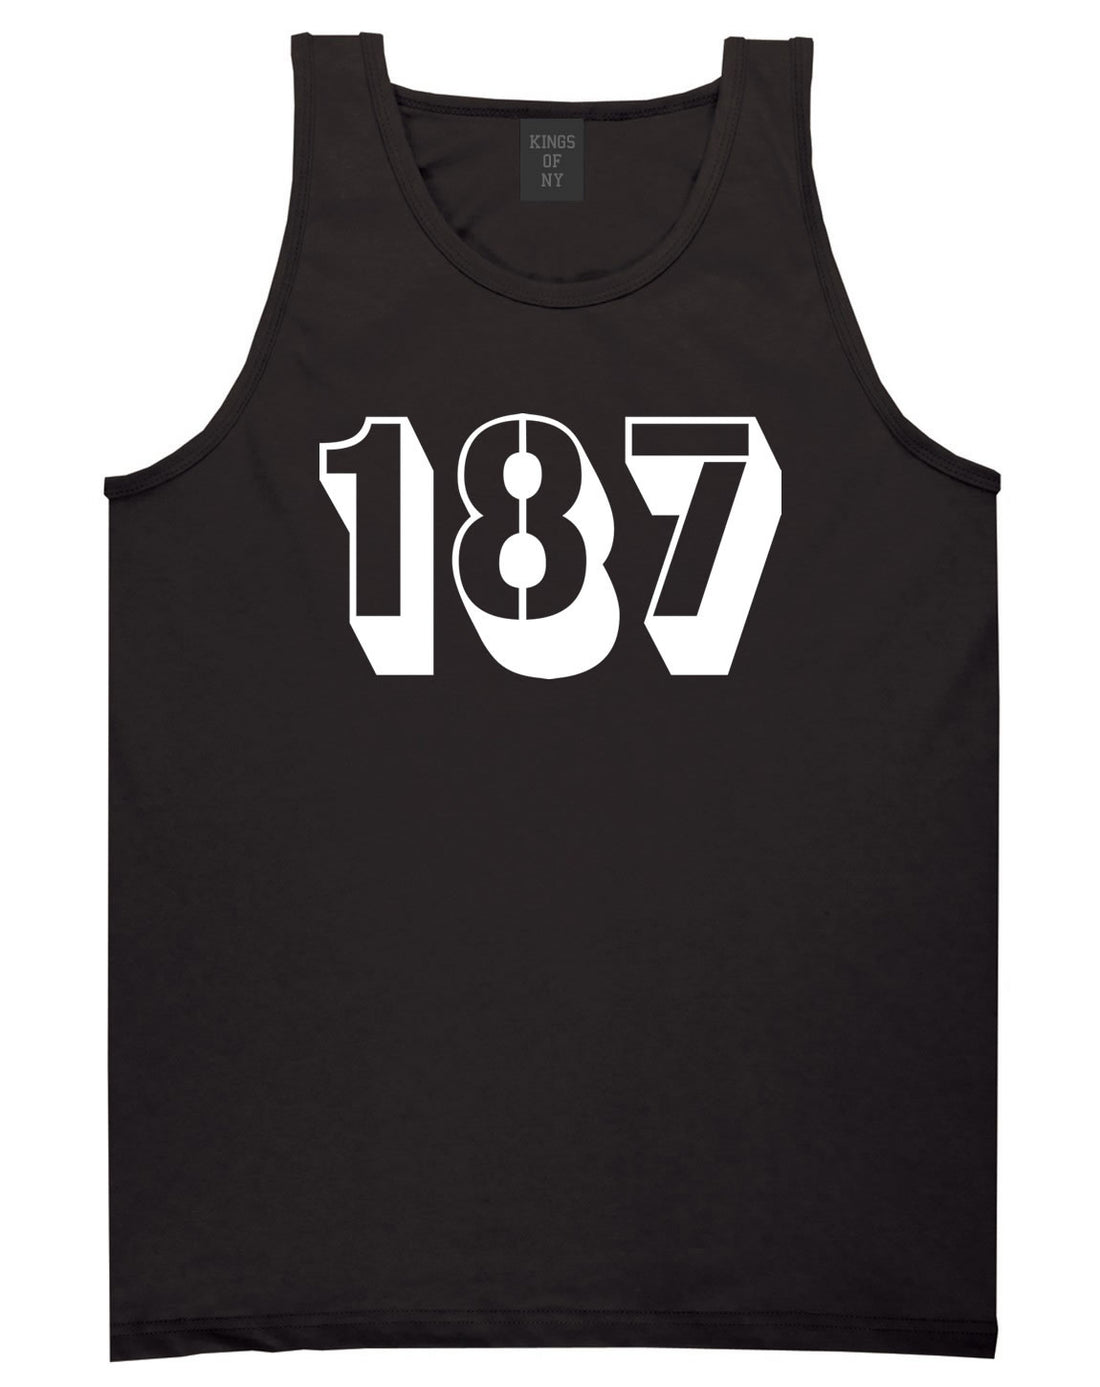 187 Tank Top in Black by Kings Of NY